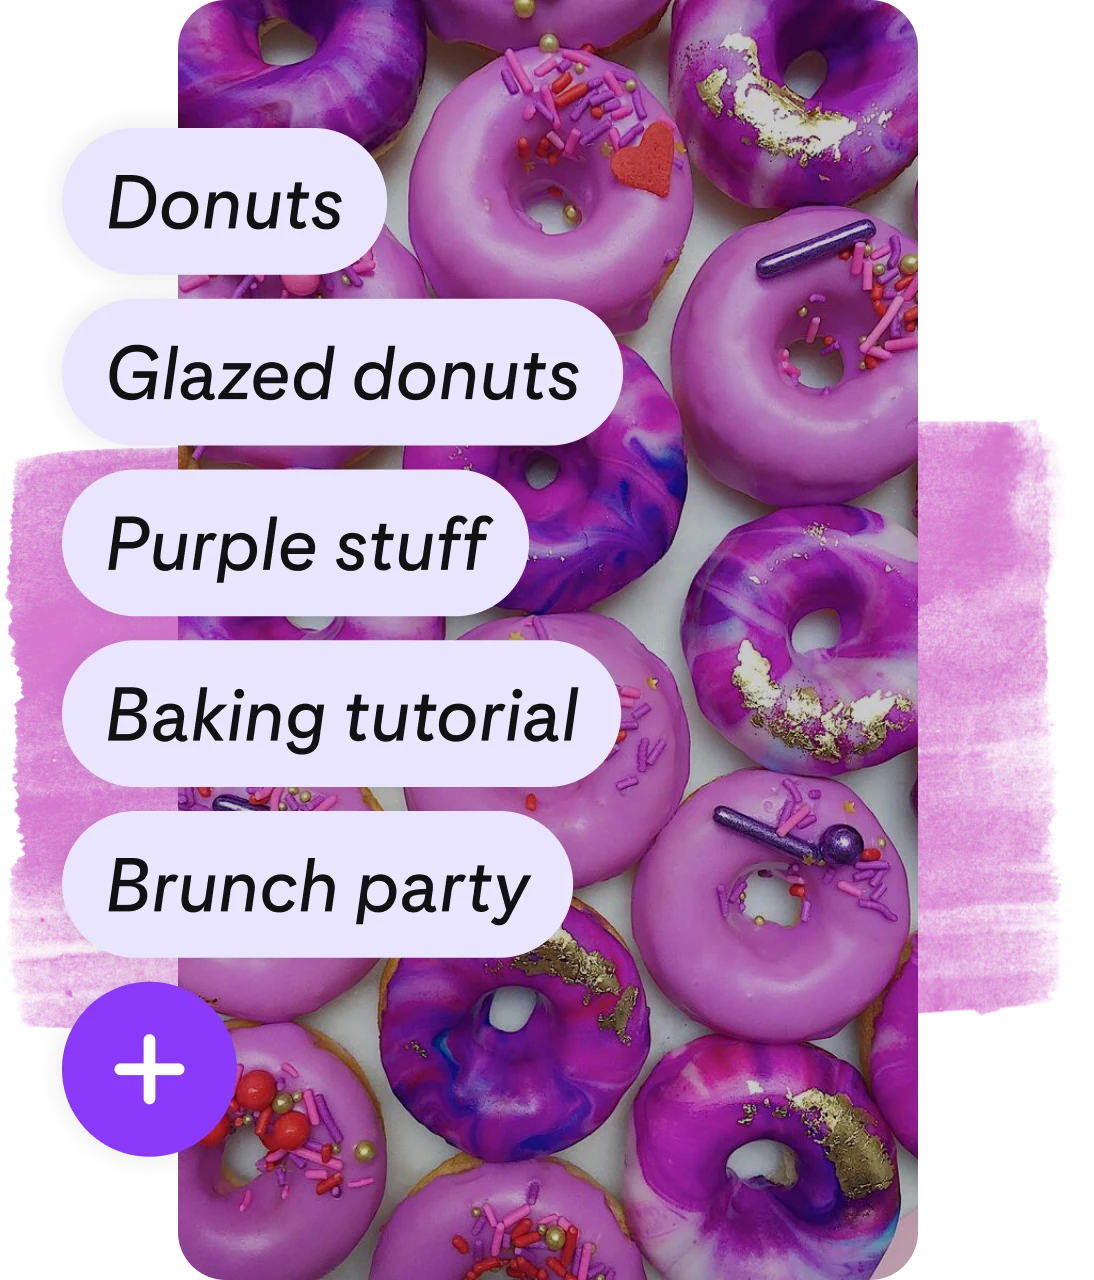 List of tags and purple add button overlaid on pin of purple donuts